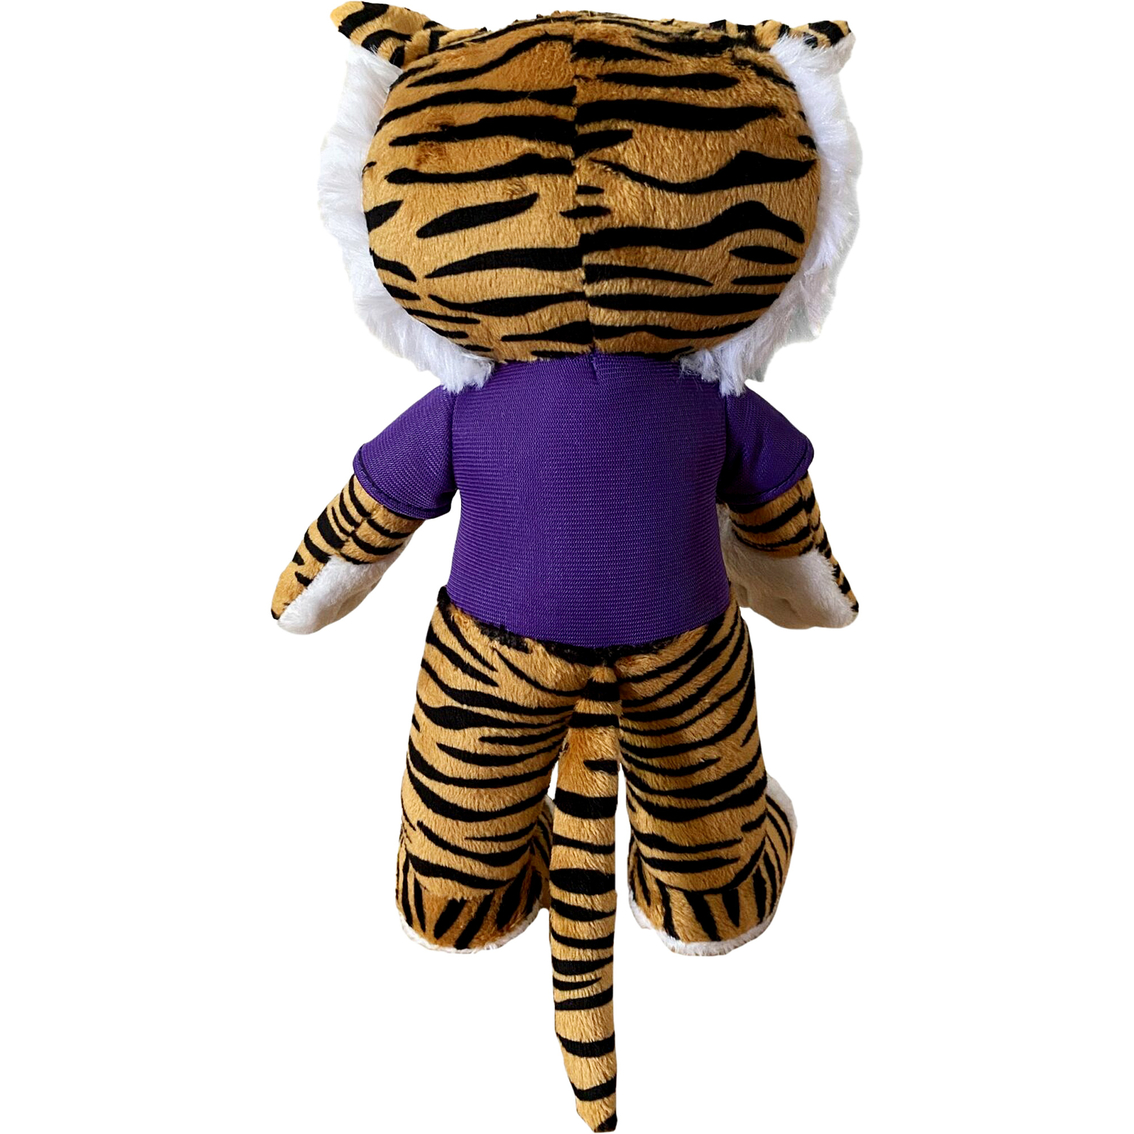 Bleacher Creatures LSU Mike The Tiger 10 in. Plush Figure - Image 2 of 3